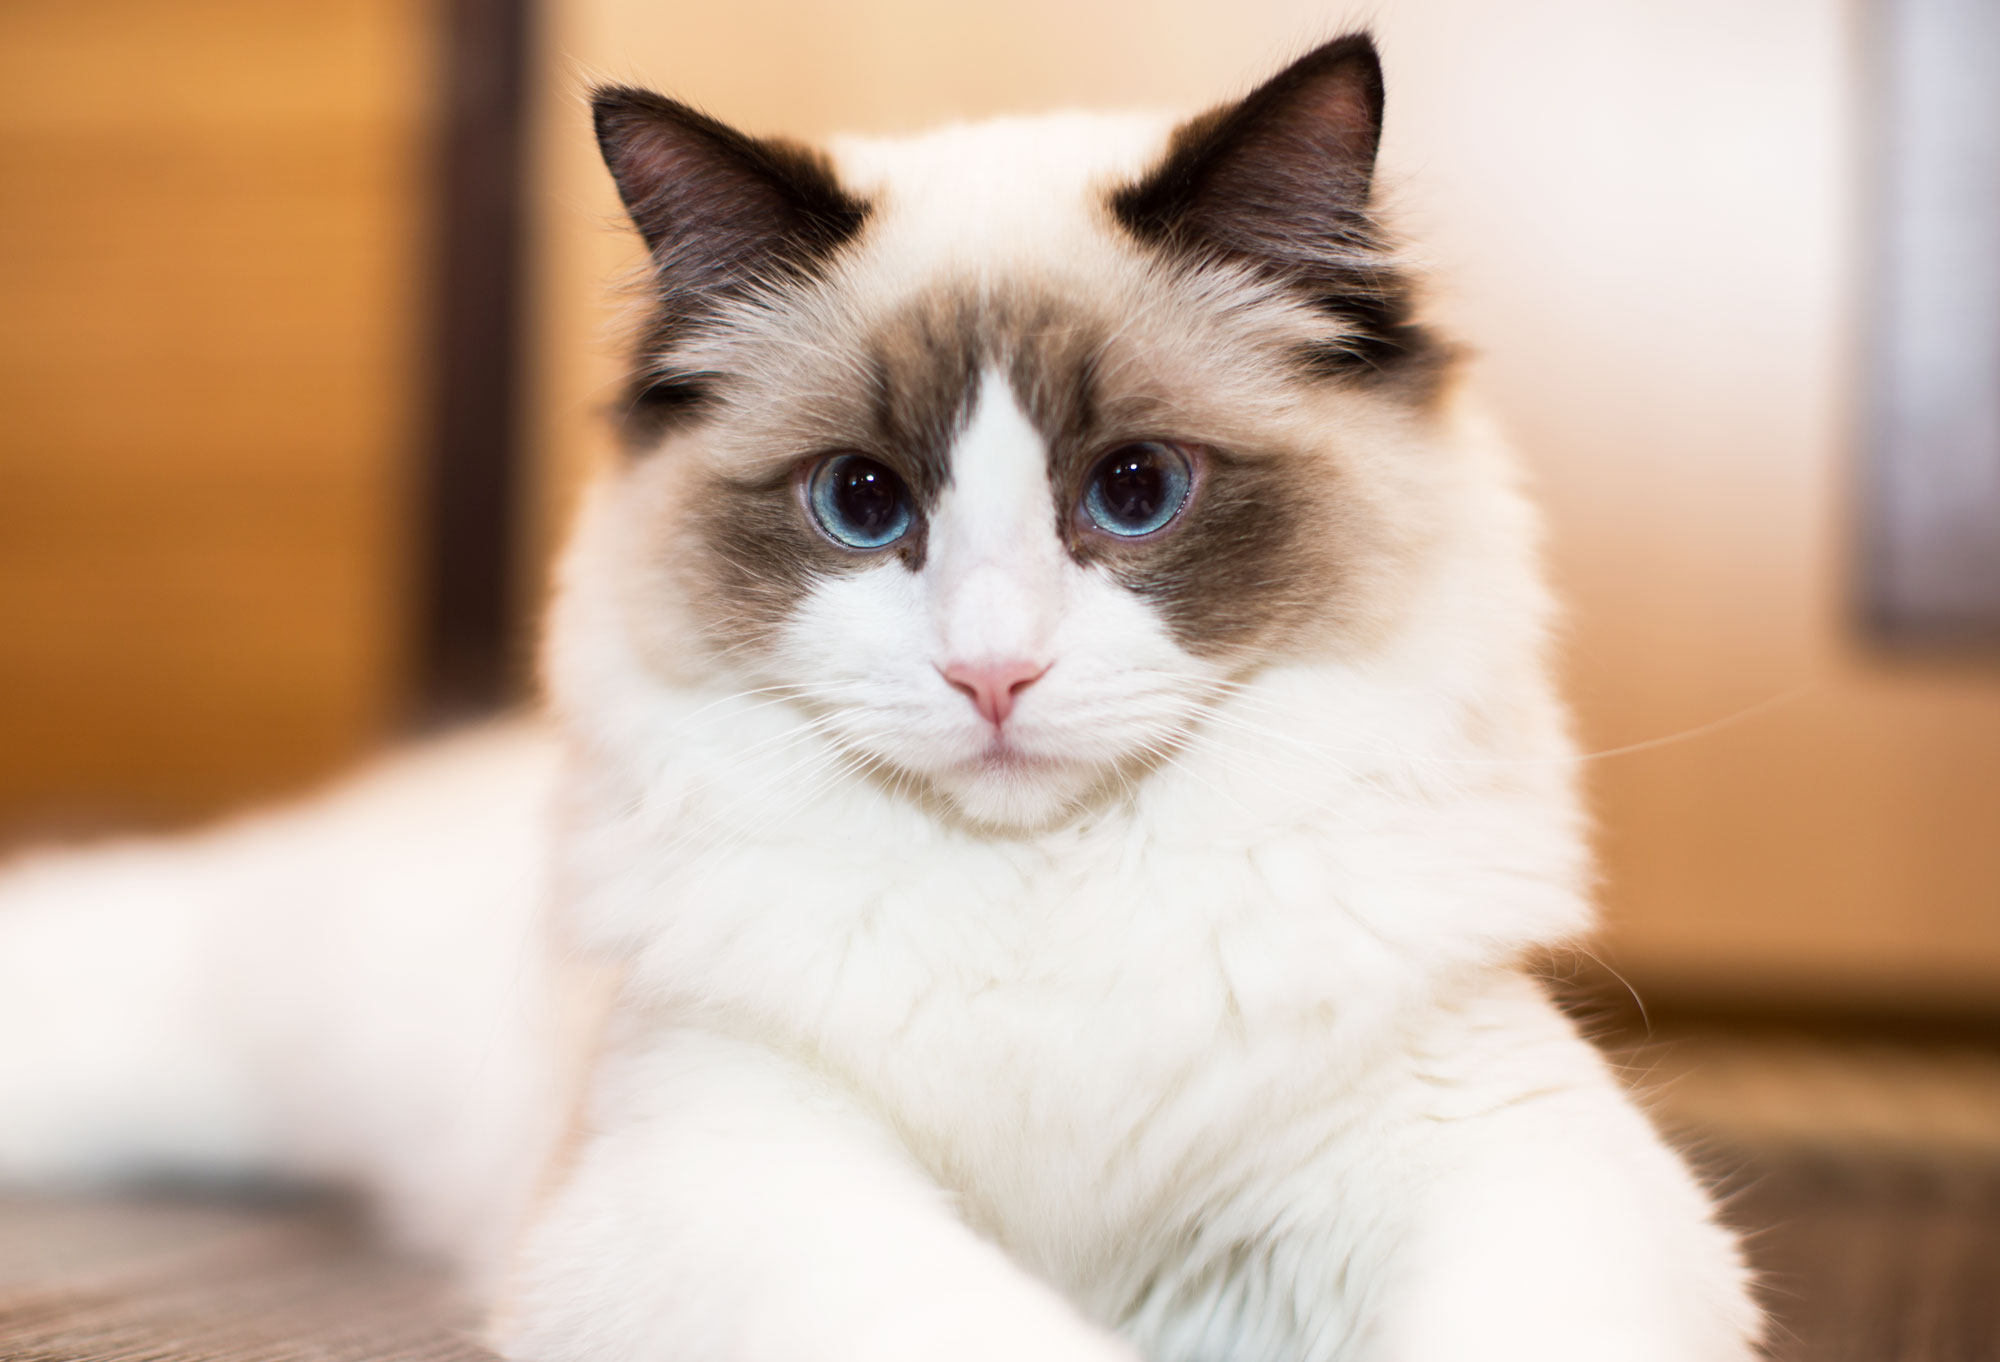 The Ragdoll Cat Breed: Personality, Care & More